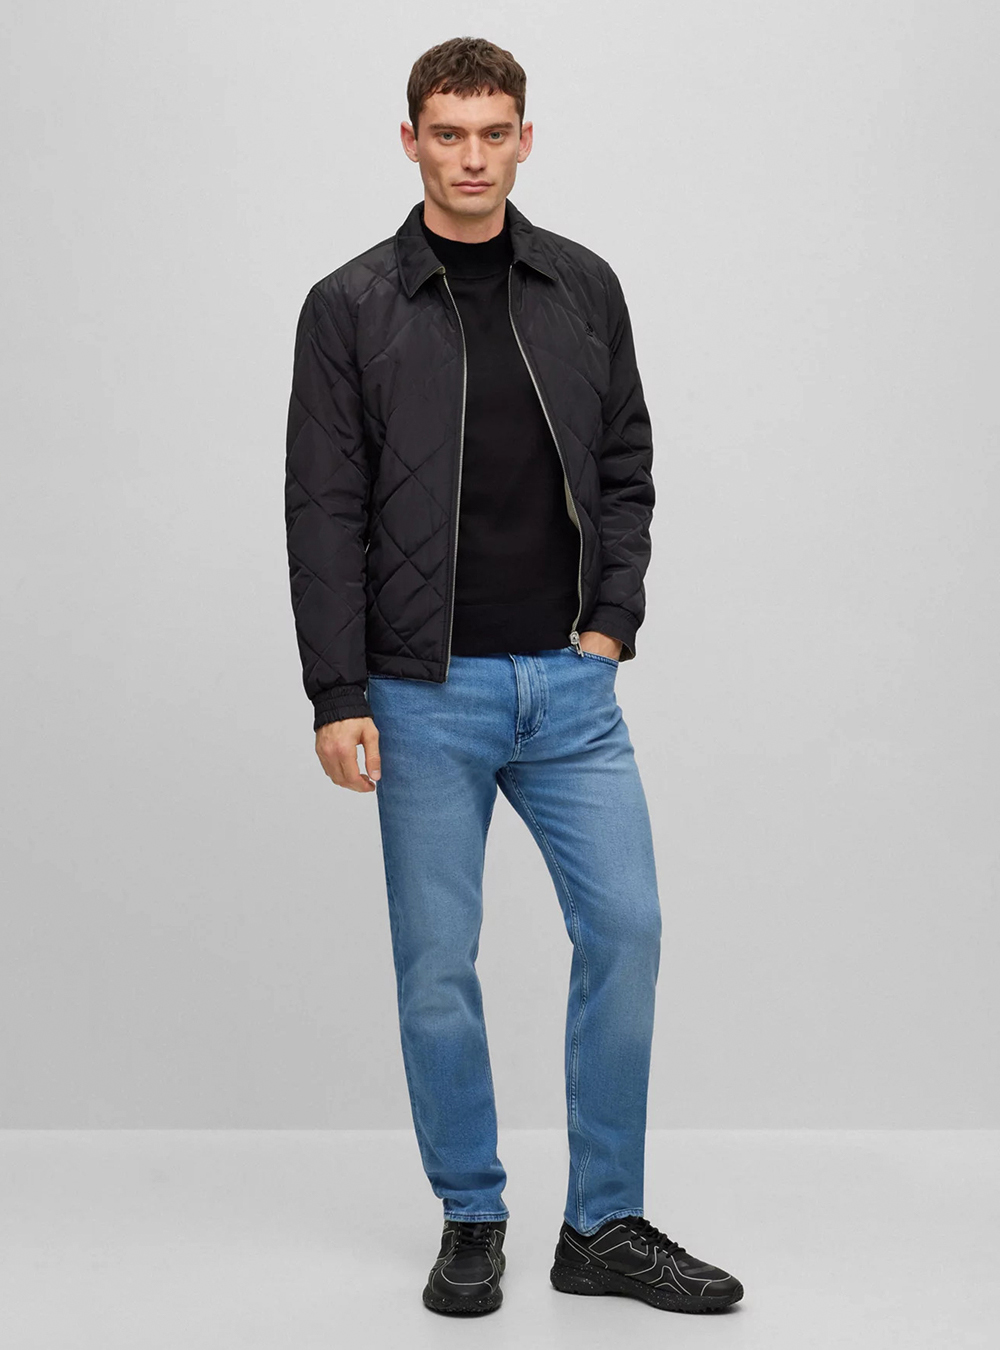 black quilted jacket and mock neck sweater paired with blue jeans 